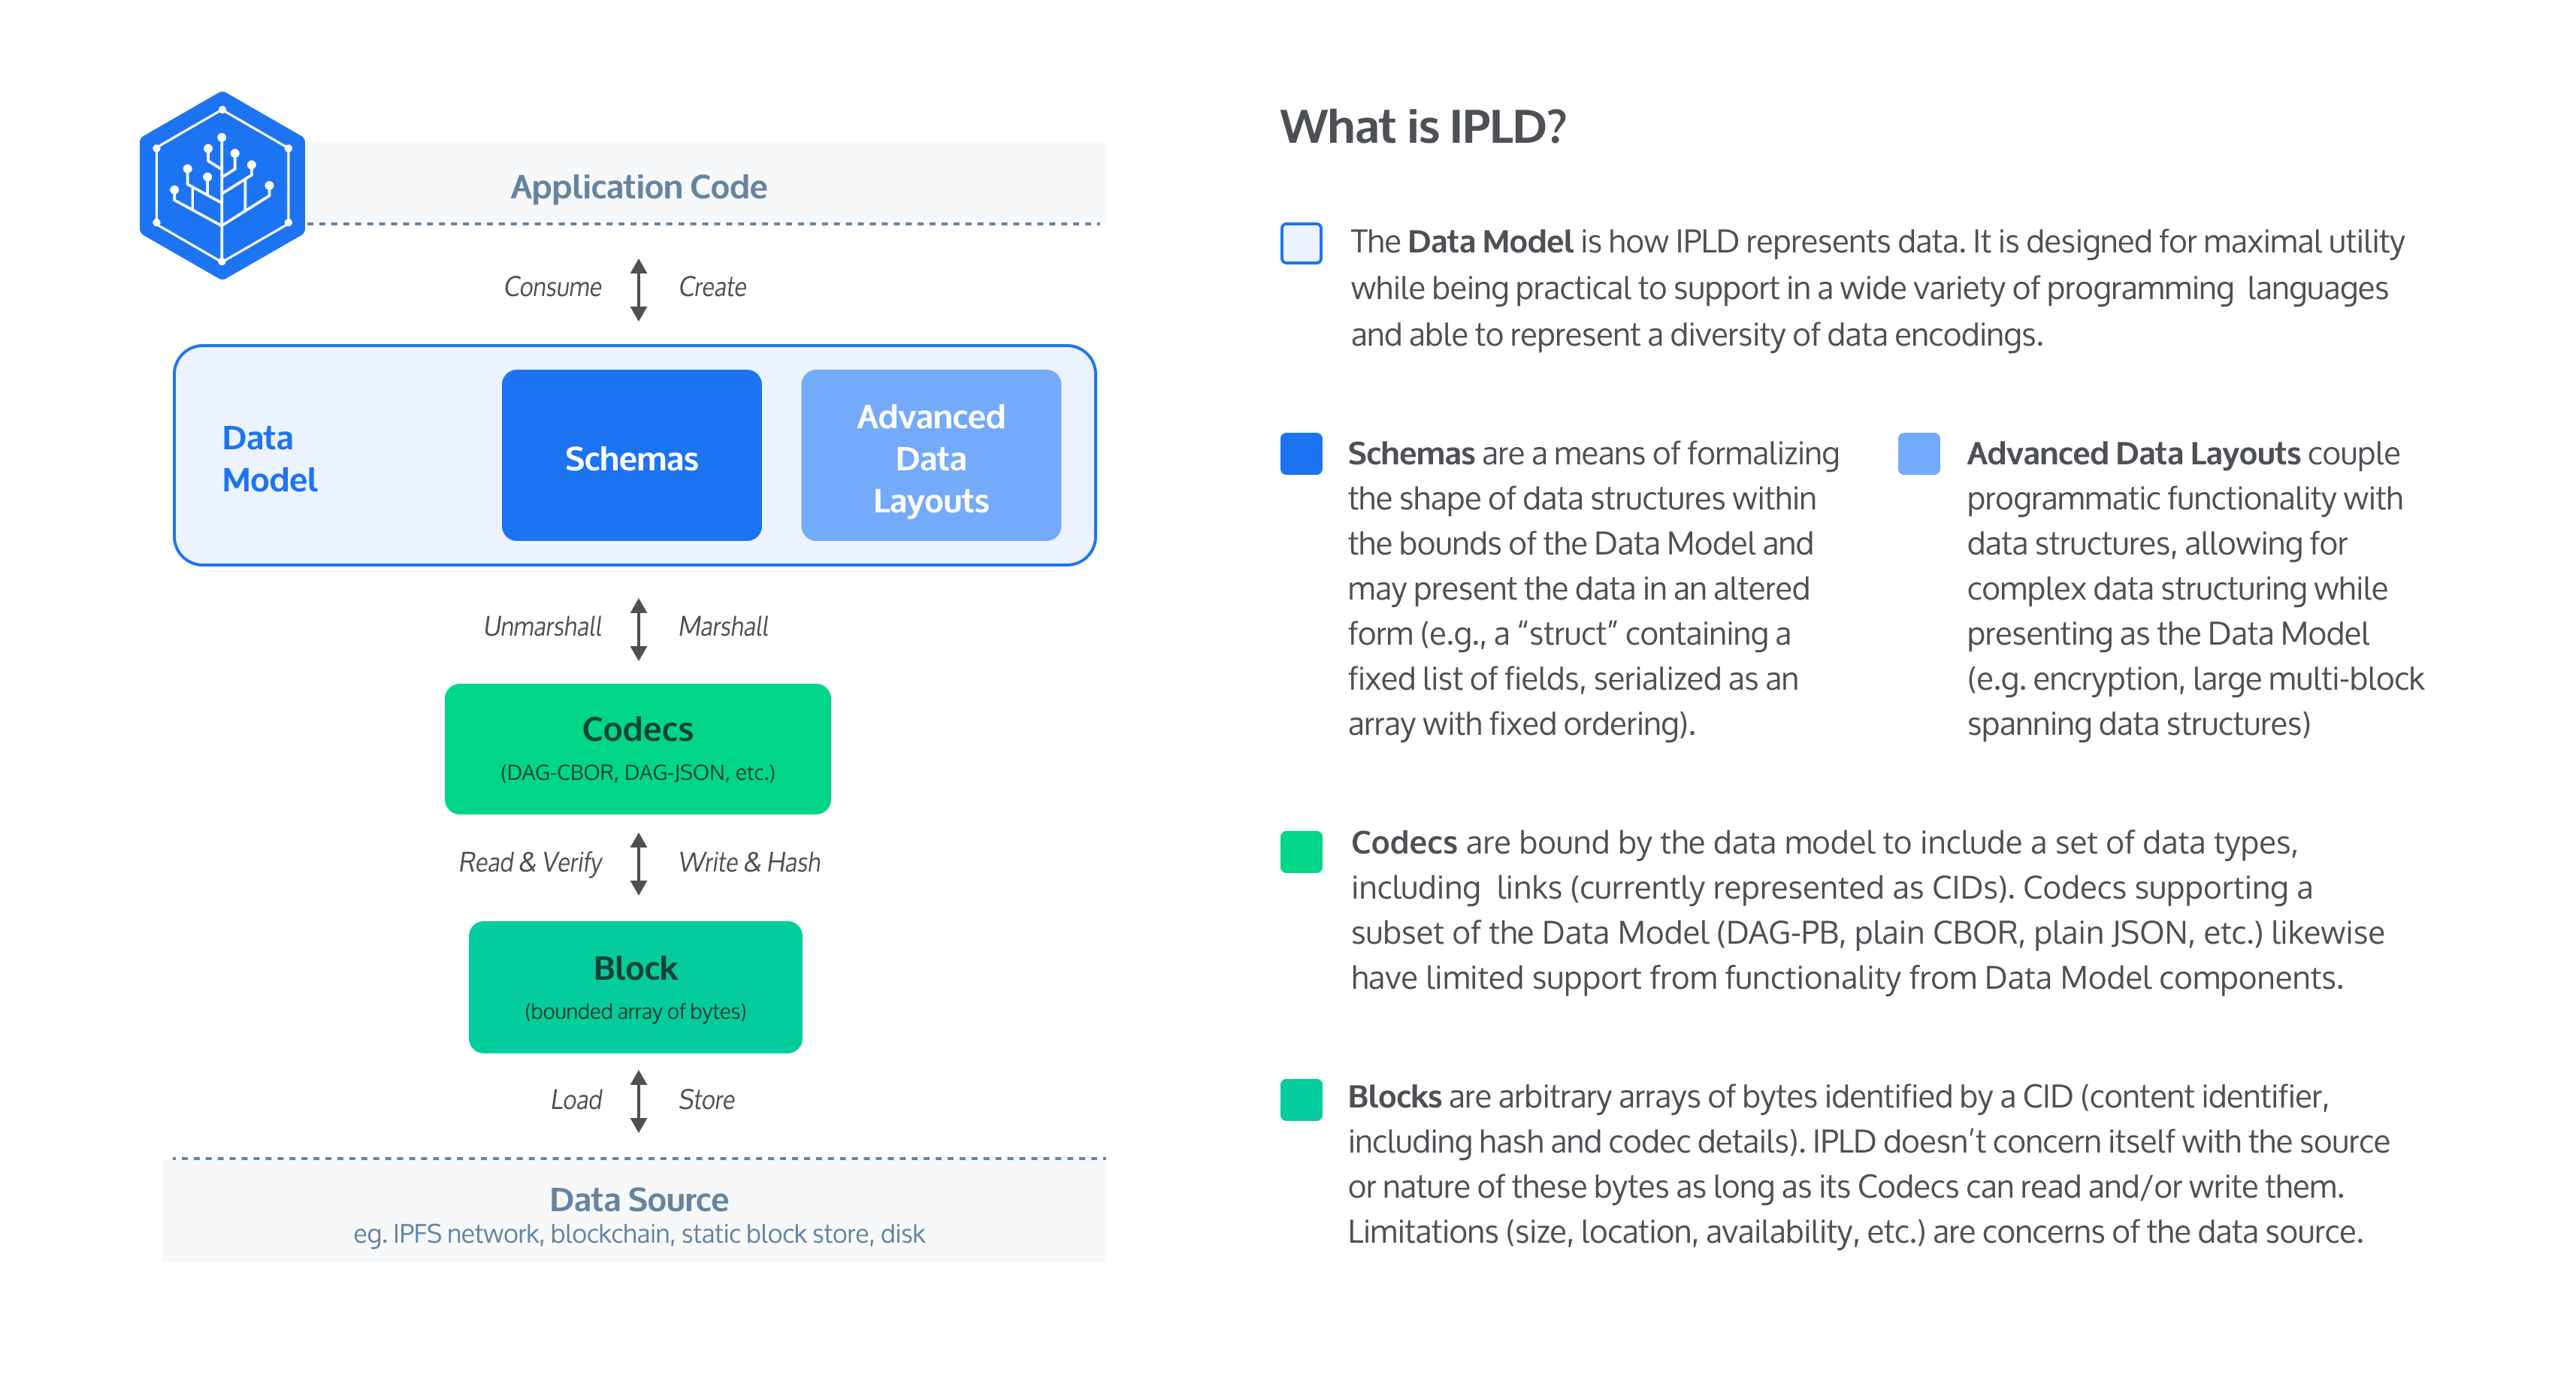 What is IPLD?